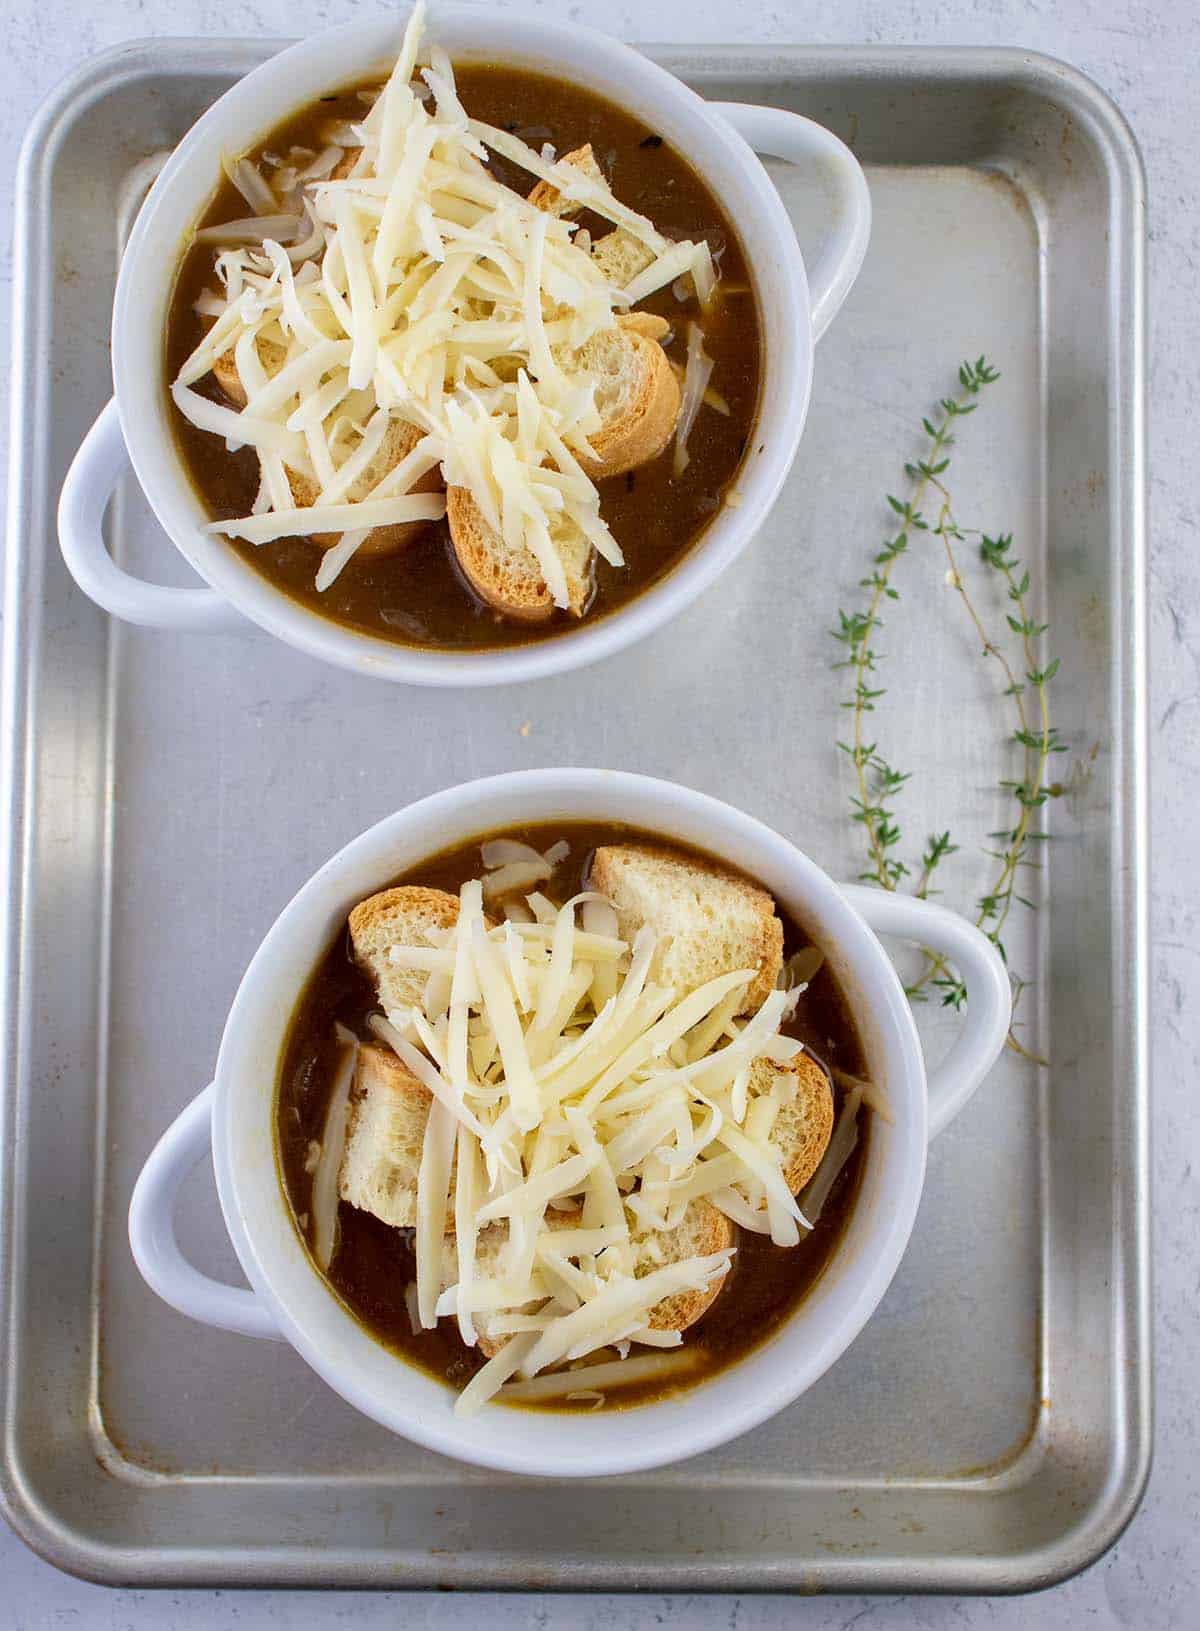 Vegetarian french onion soup topped with croutons and cheese prior to melting.